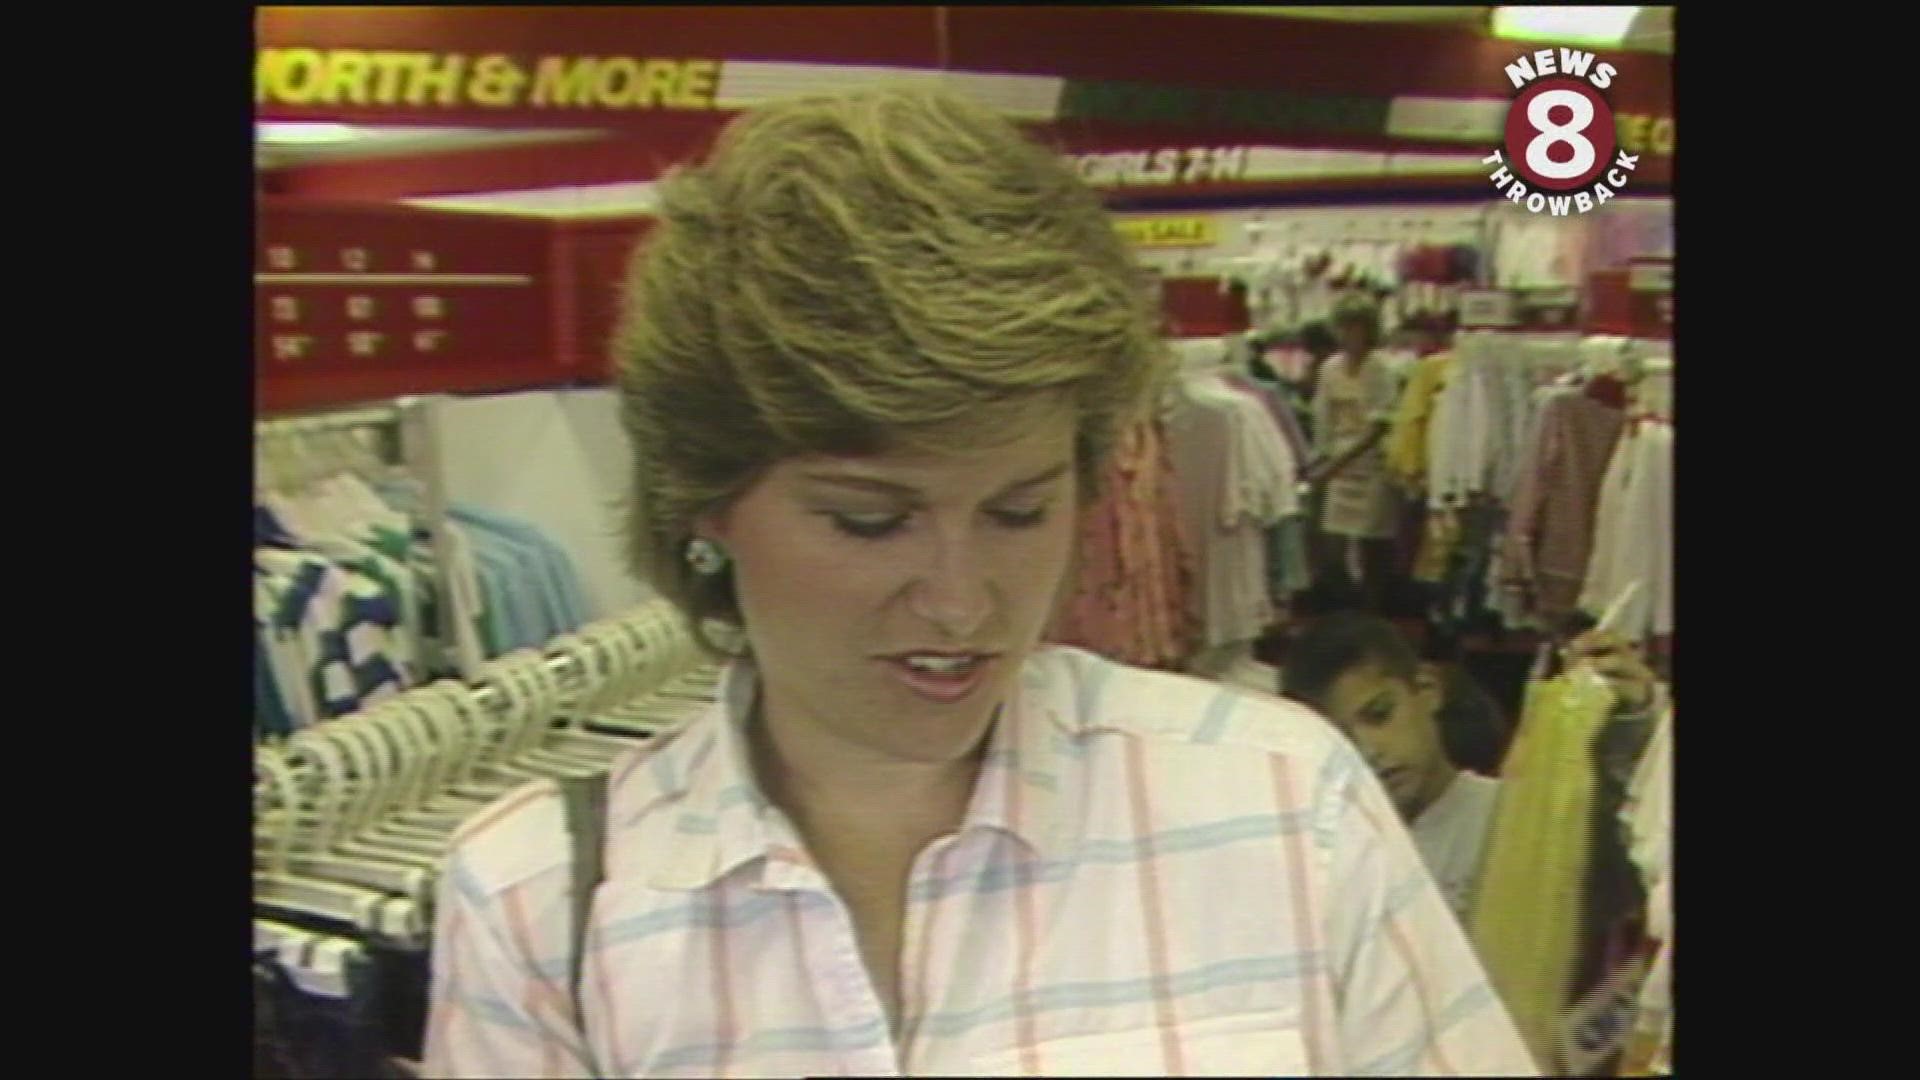 Shopping for new clothes for the school year 1987